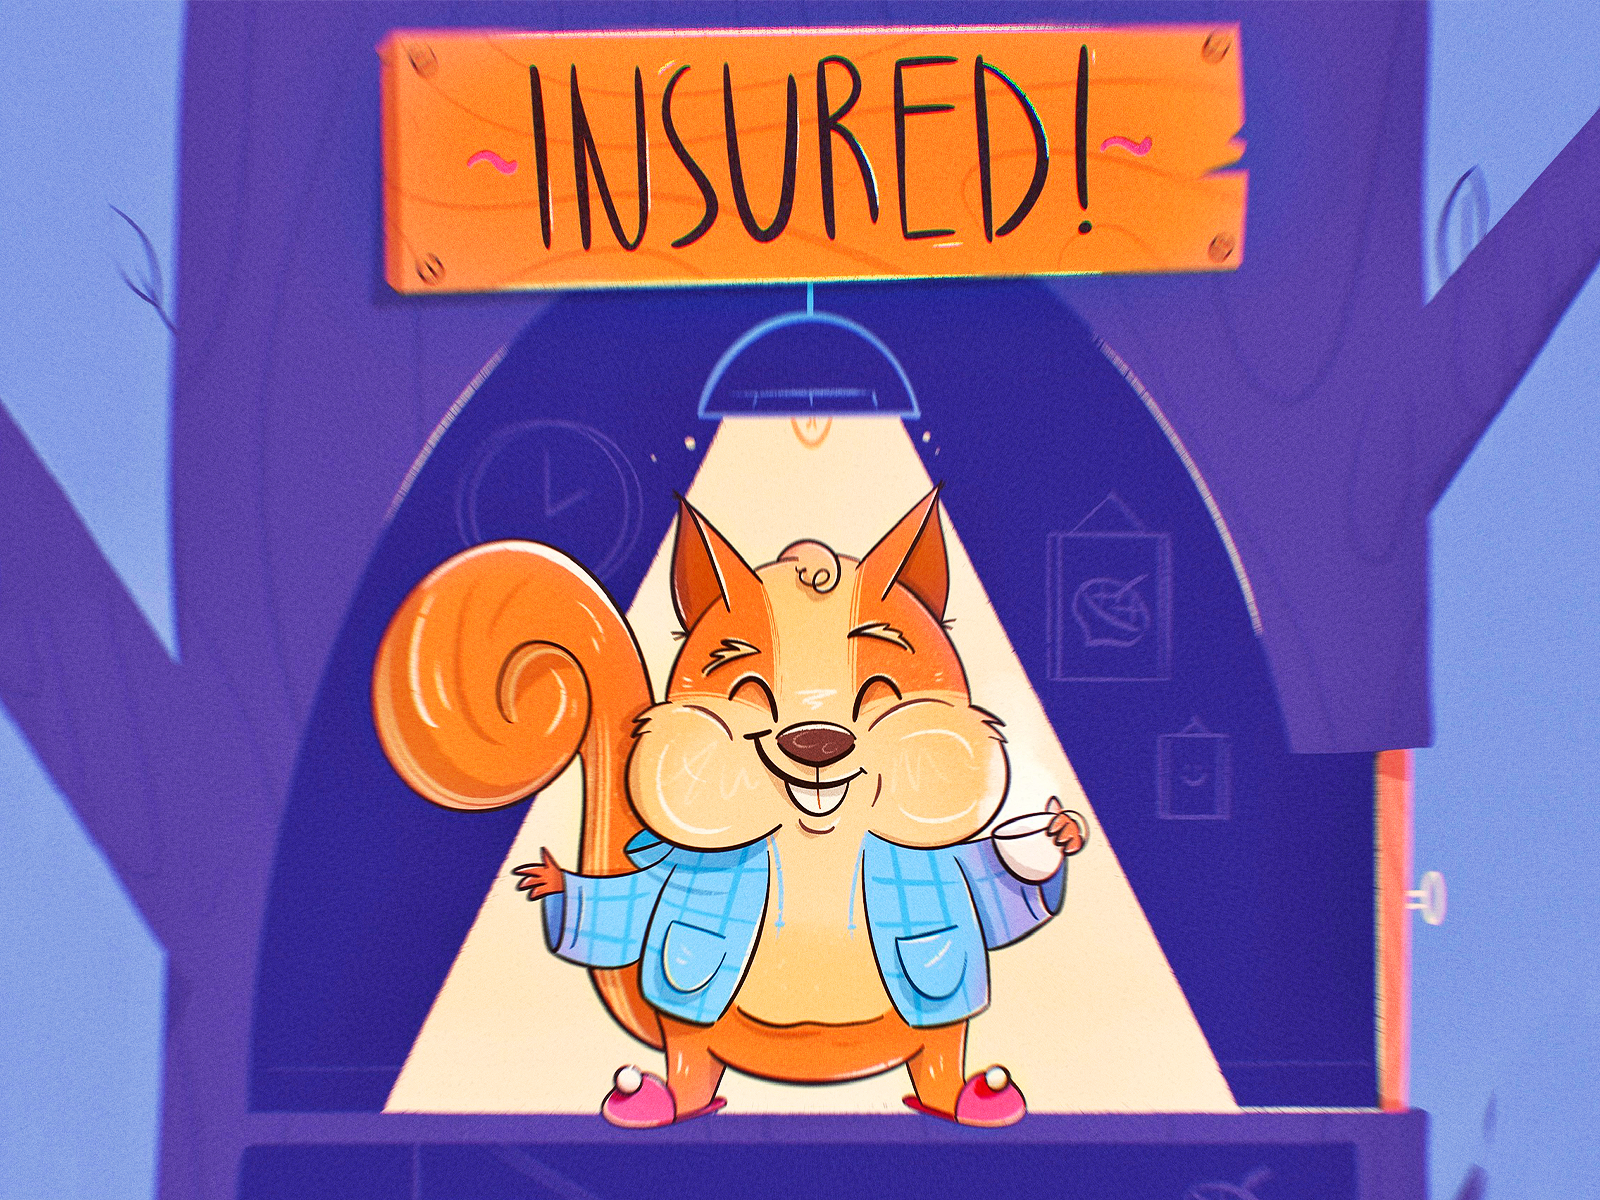 Insured! caricature characterdesign character acorn house coffee interior cute animal slippers cozy squirrel tree home insurance drawing illustration